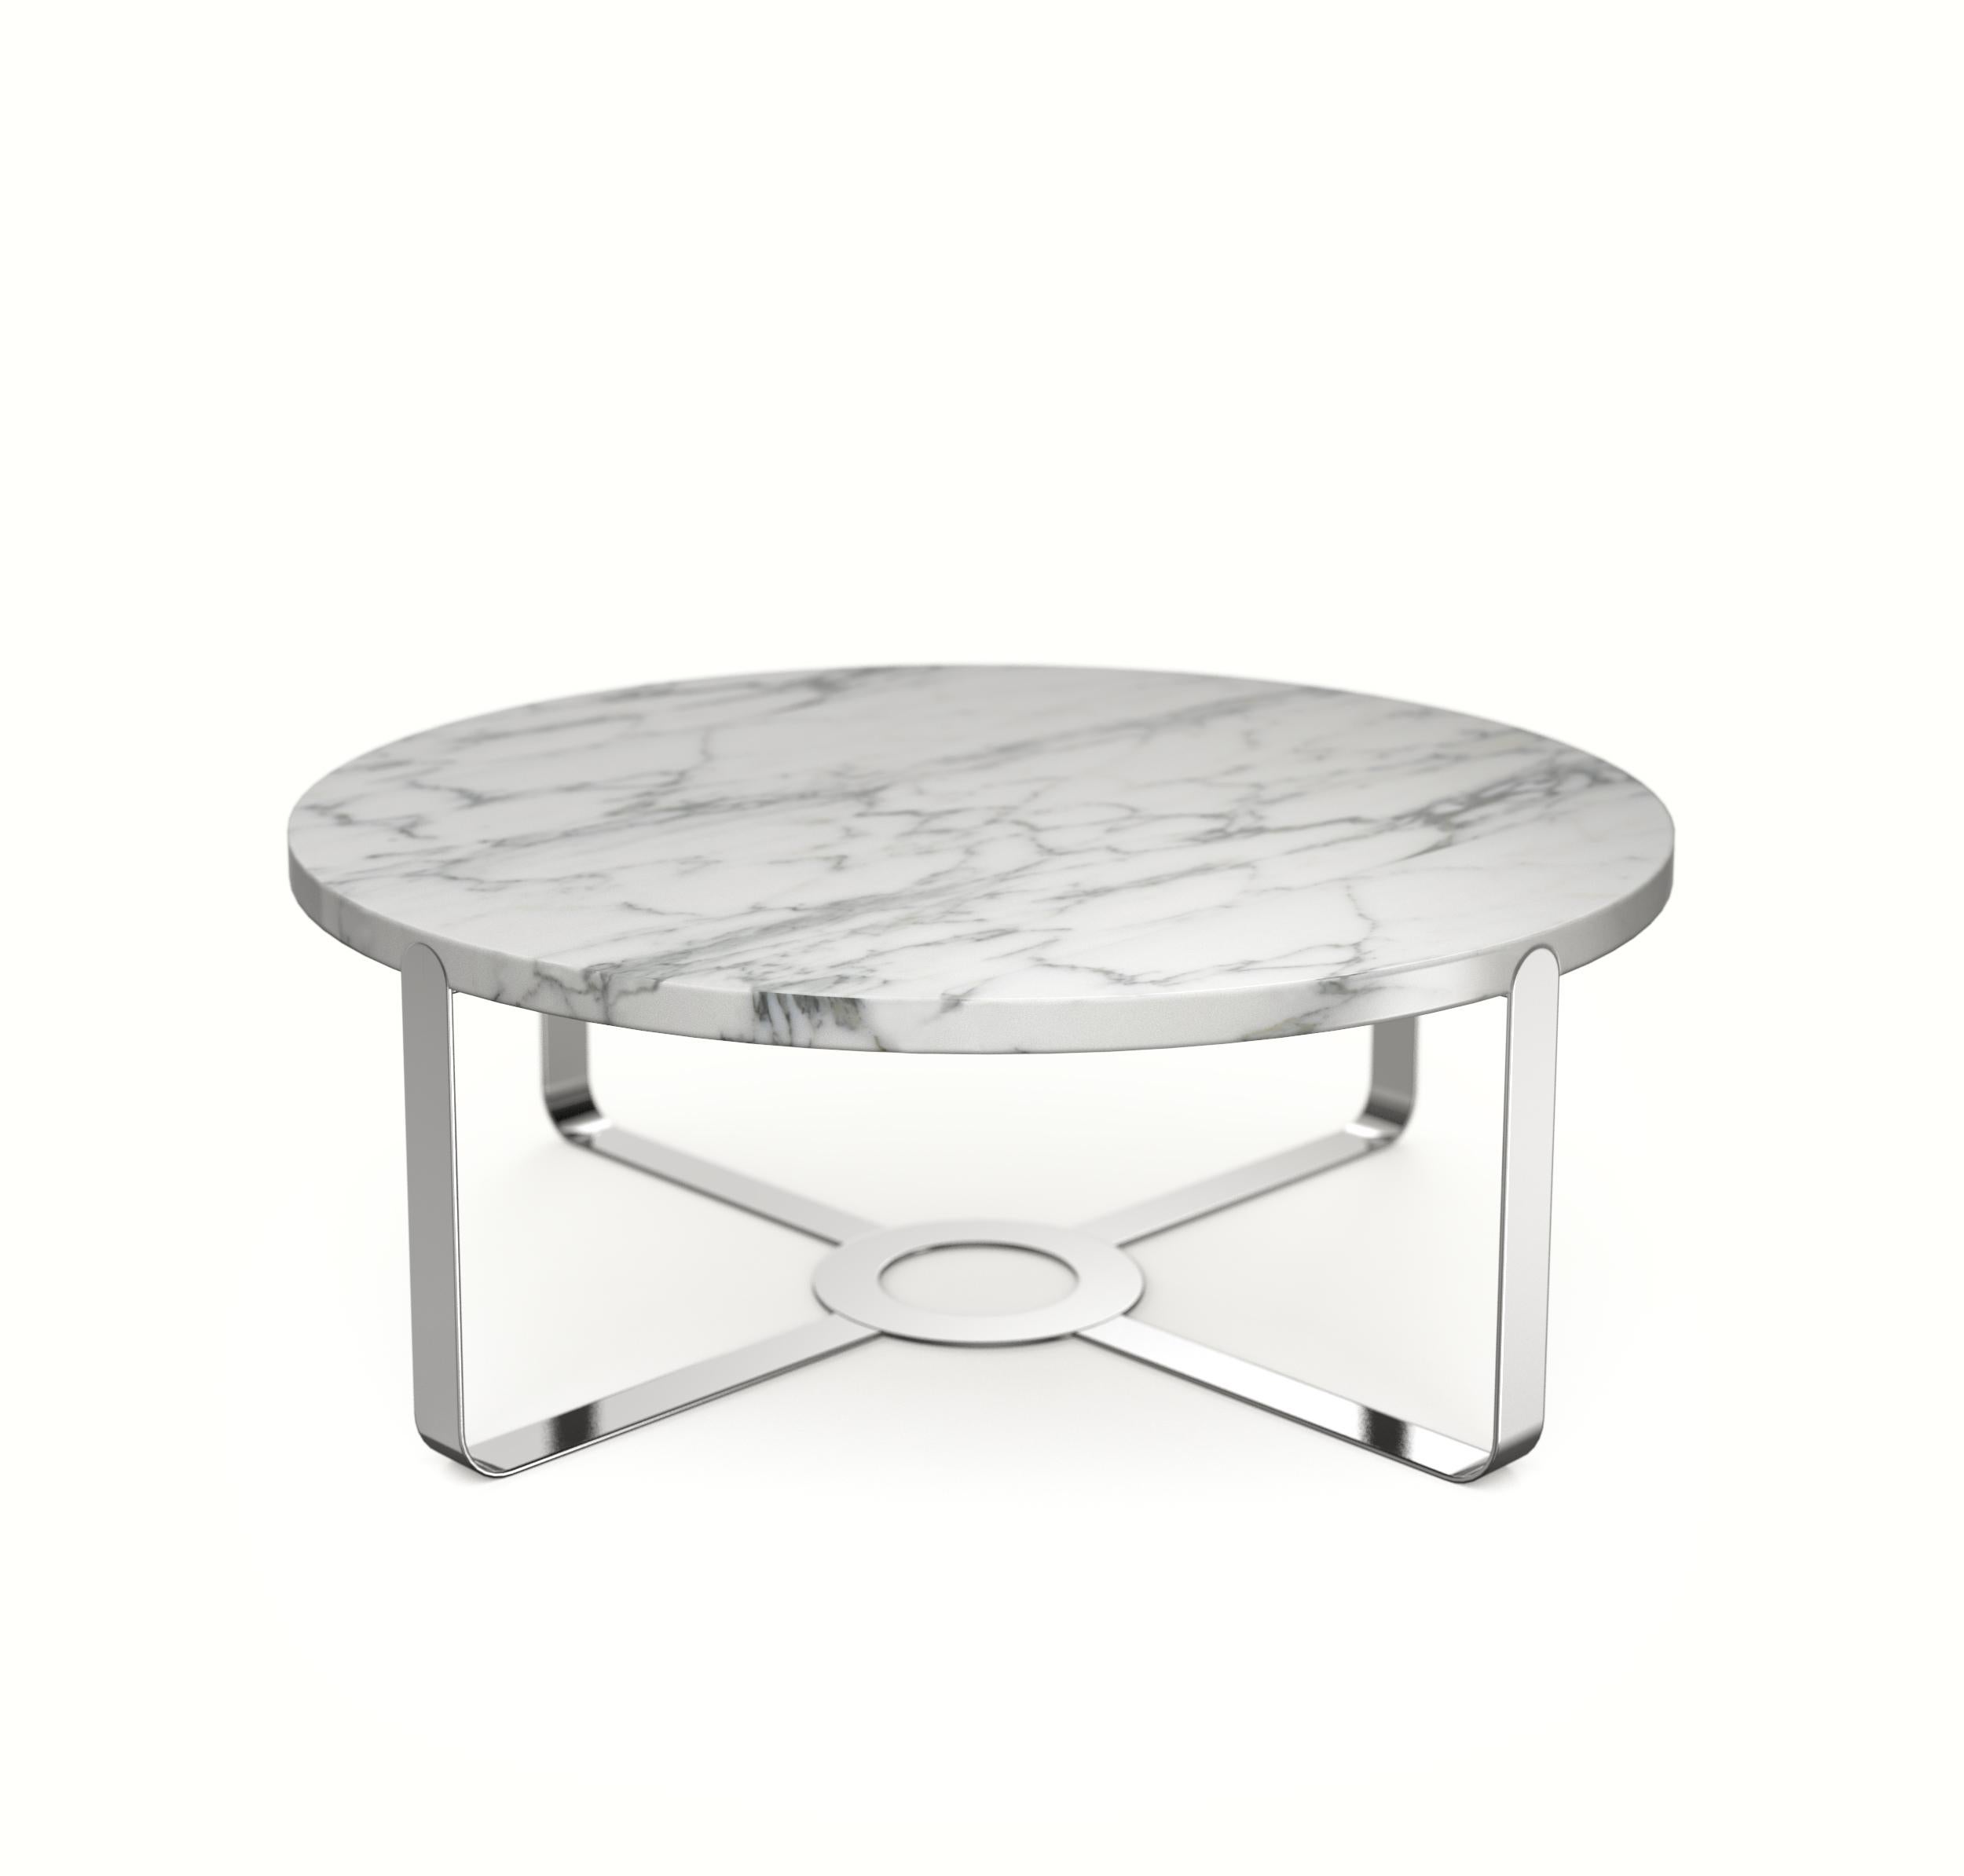 Noon marble coffee table by Marmi Serafini
Materials: Invisible grey marble
Dimensions: ø 120 H 45 cm.

Noon is an elegant and classy coffee table where sinuous and subtle lines and admirable details enhance the materiality of marble.

Marmi